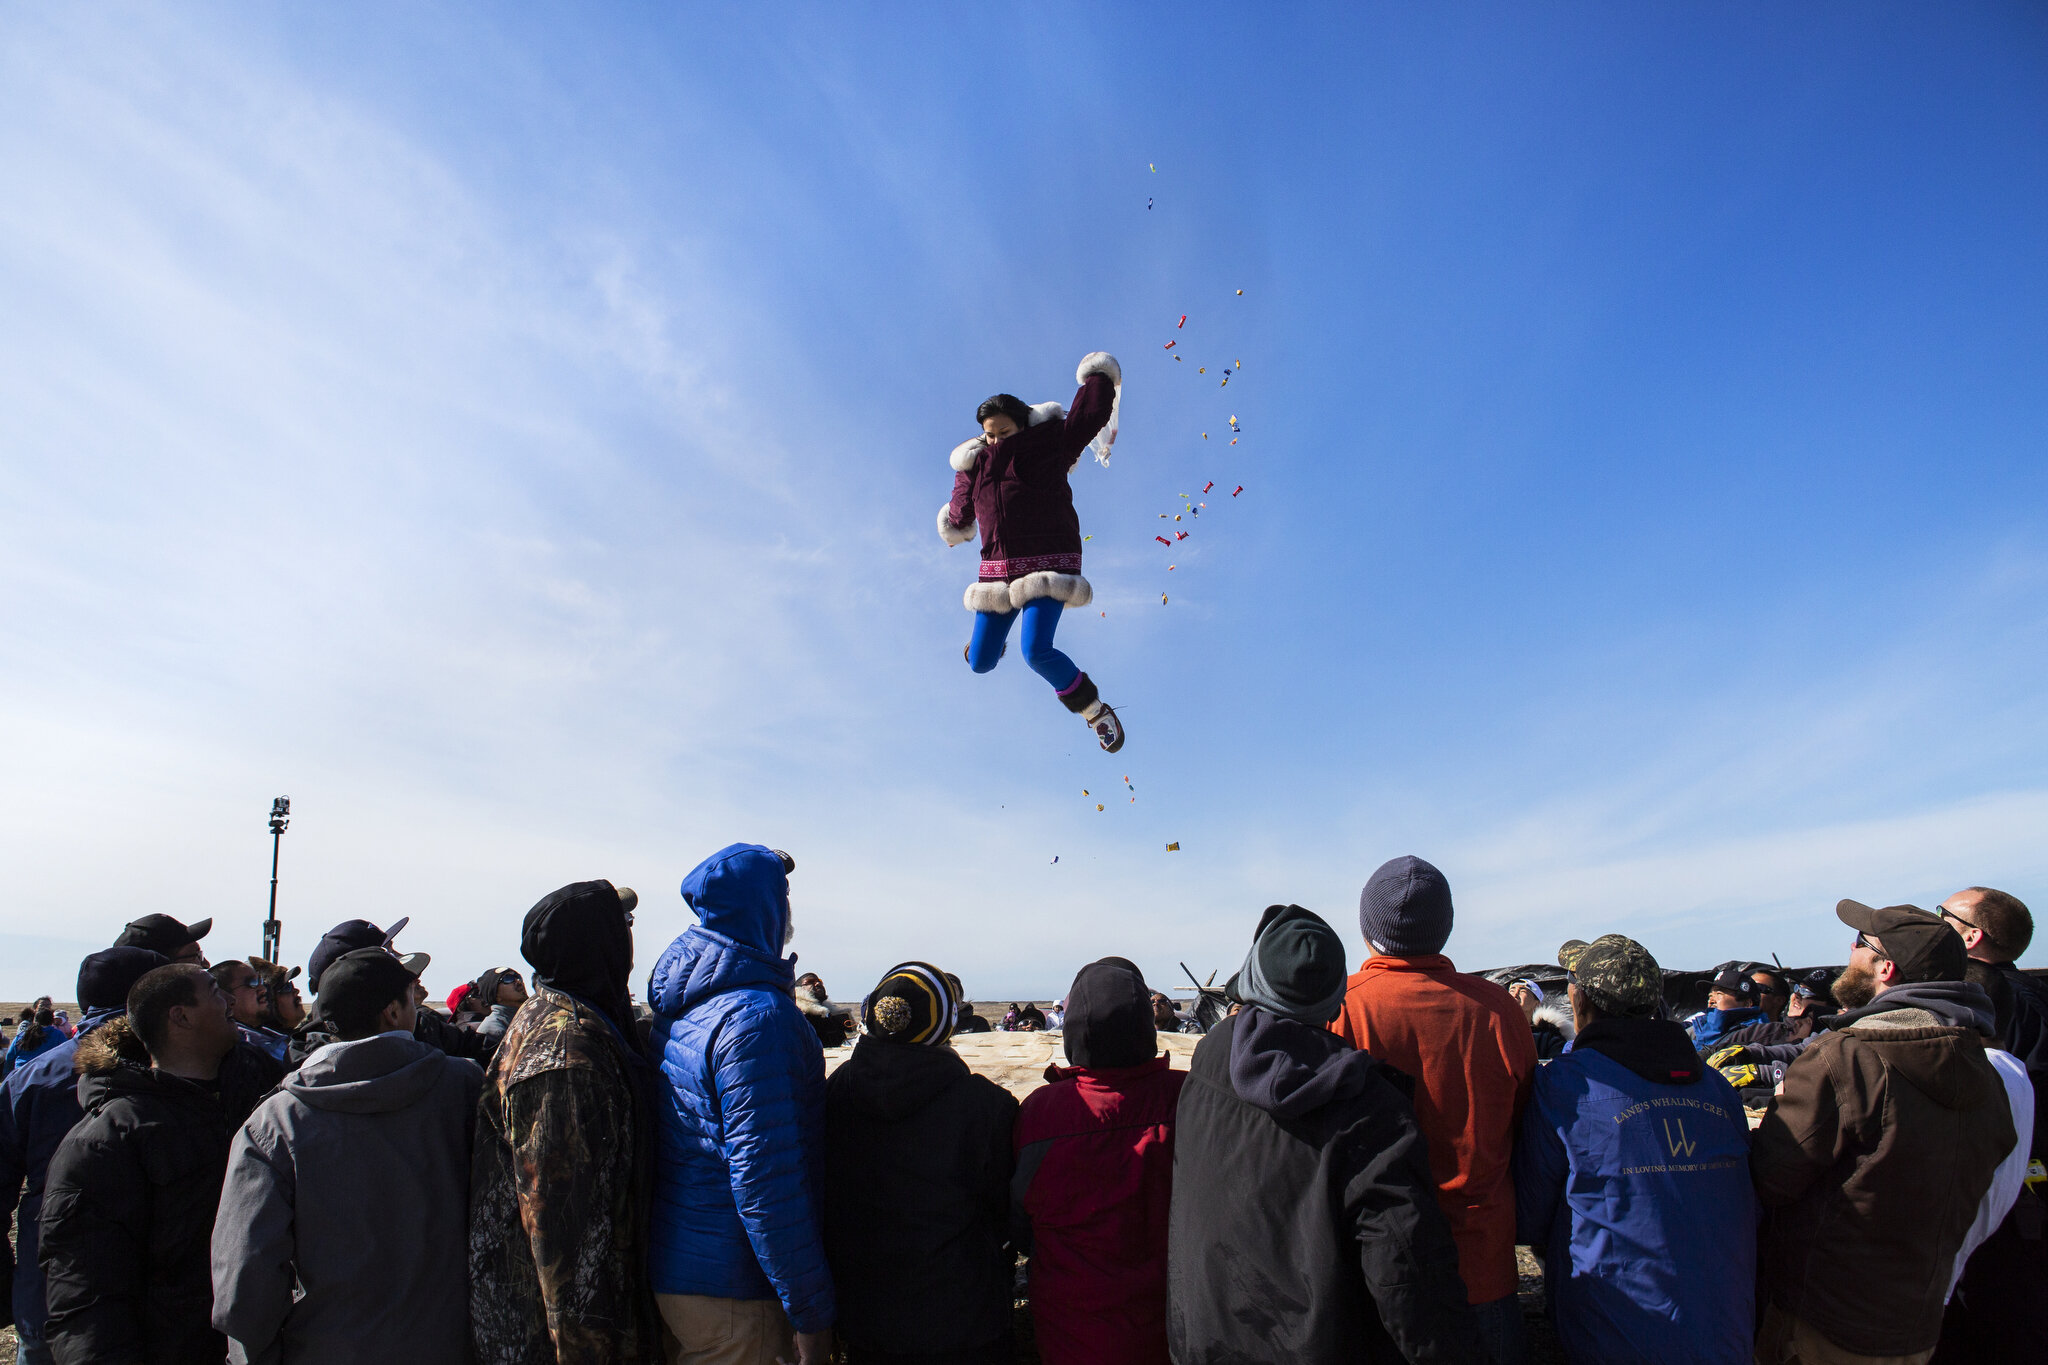  The Nalukataq, or blanket toss, in Point Hope, Alaska. The blanket toss is a celebratory Iñupiat tradition, originating from long ago when hunters would get launched into the air on what was (and still is) a giant trampoline made out of seal skins i